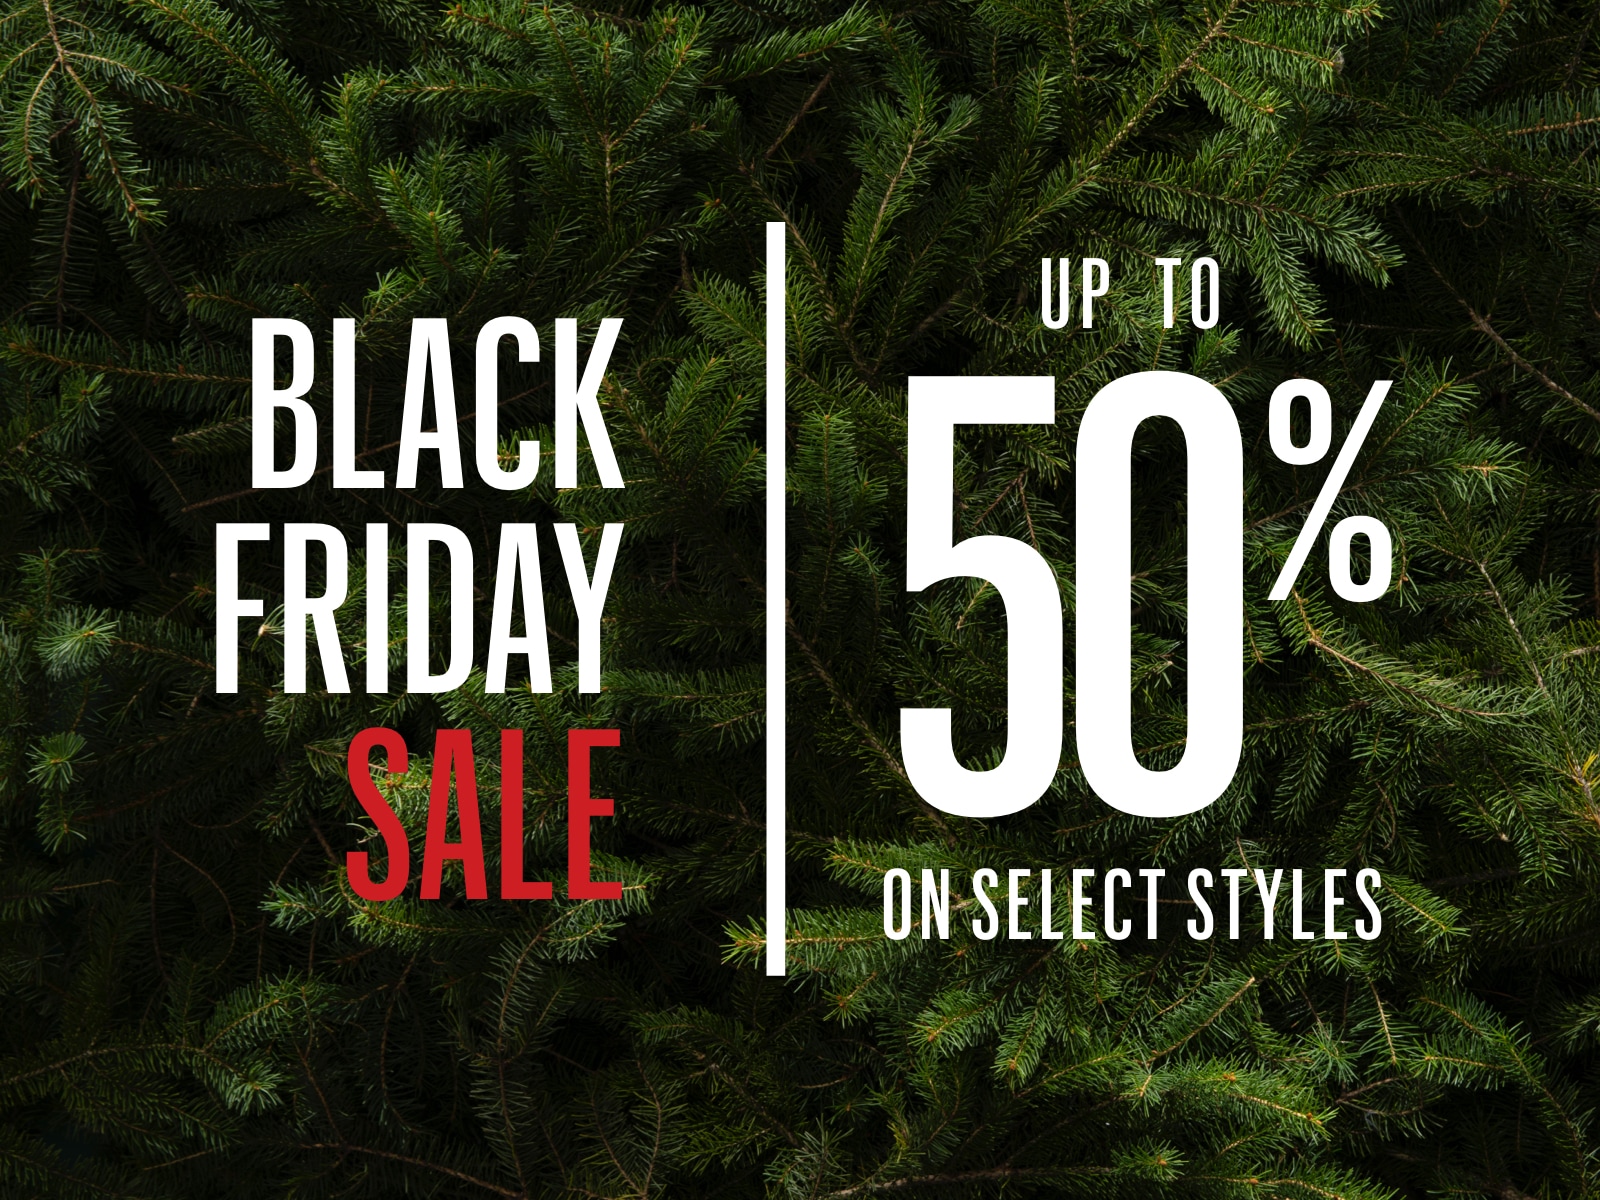 Black Friday Starts Now - Save up to 50%